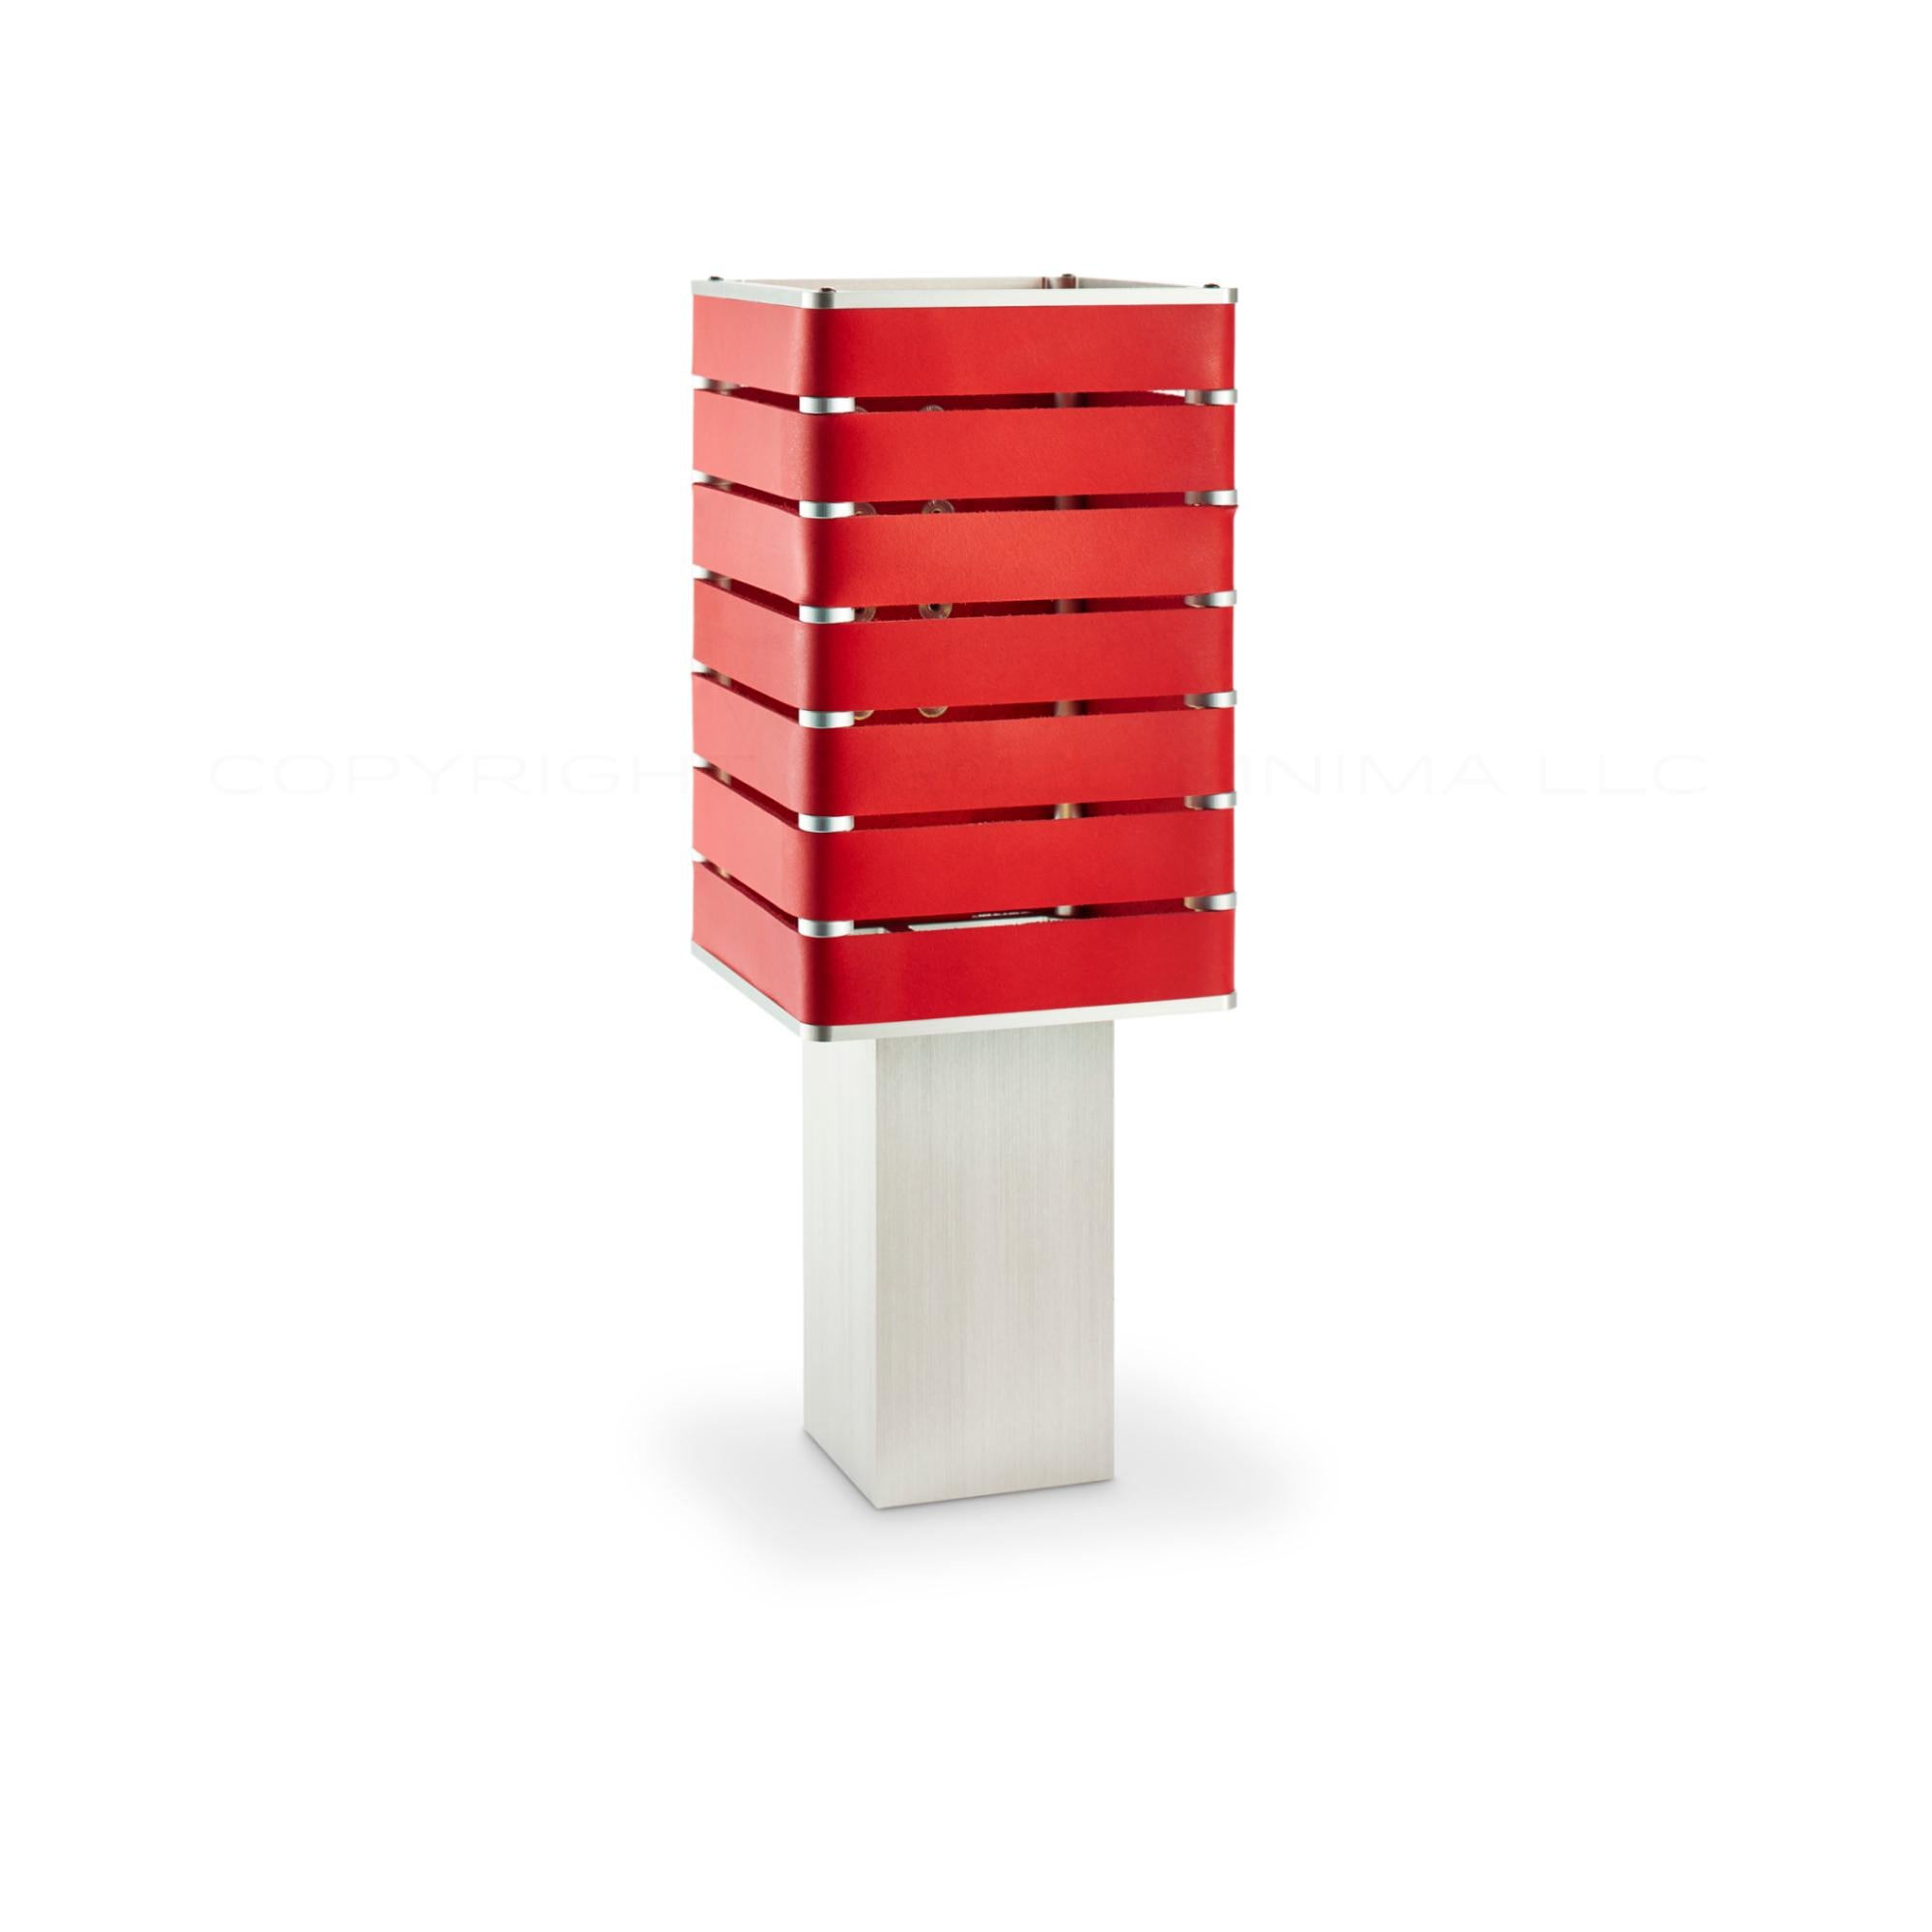 Modern, Minimal, Solid Metal Table Light in M. Fiesta Red Italian Leather with Nickel Plate Snaps.

Introducing Exigen, the customizable lighting platform from mnima.  Presented in an array of crisp, eye-catching colors, Exigen offers maximum